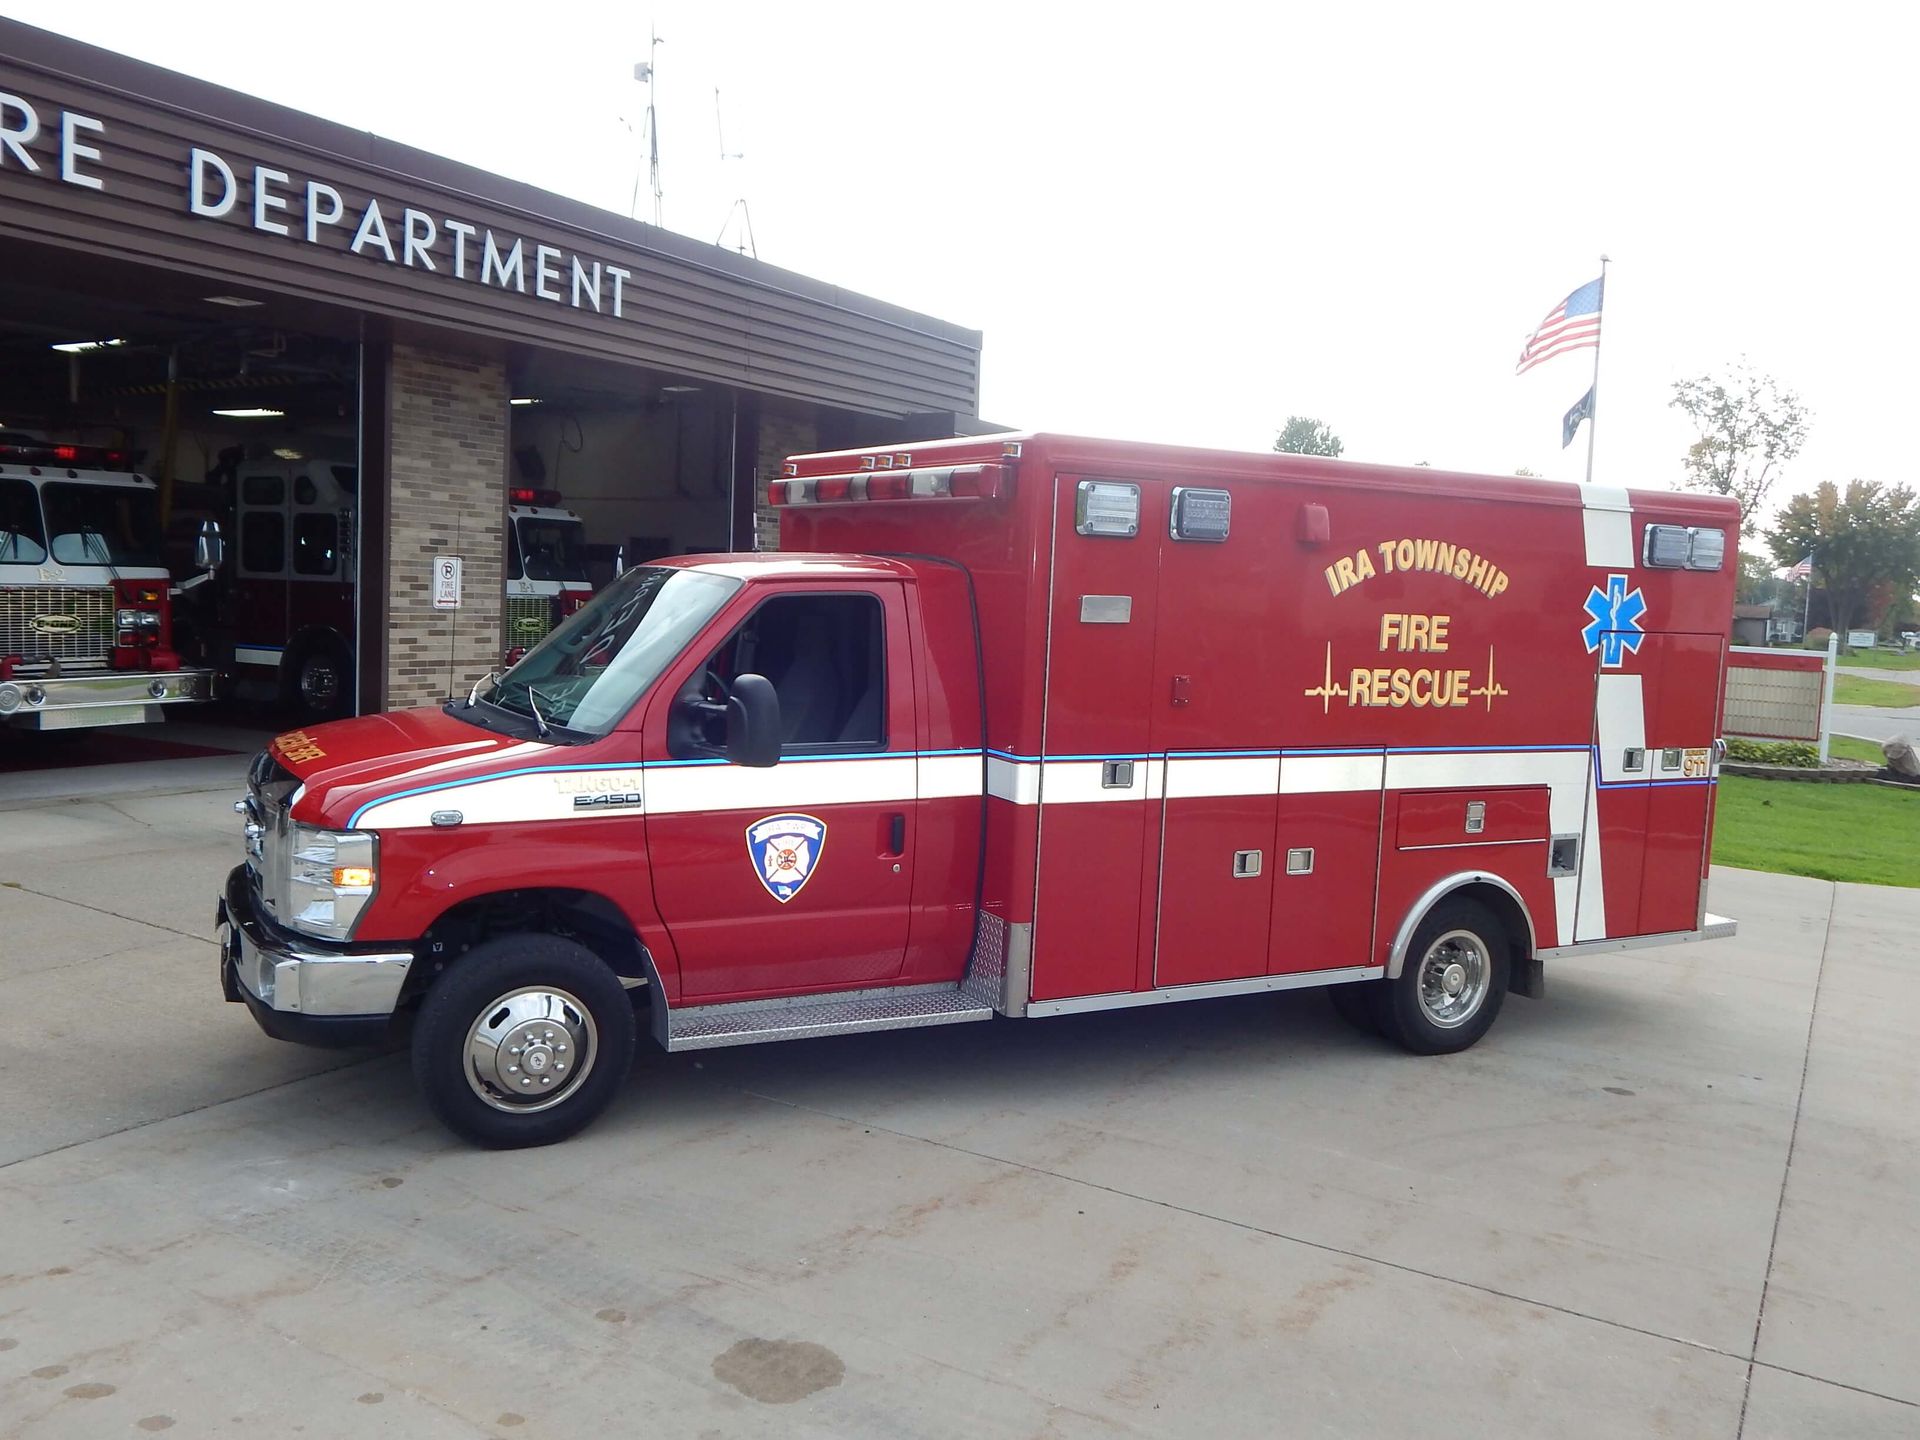 A red ambulance is parked in front of a building that says Ira Township Fire Department.